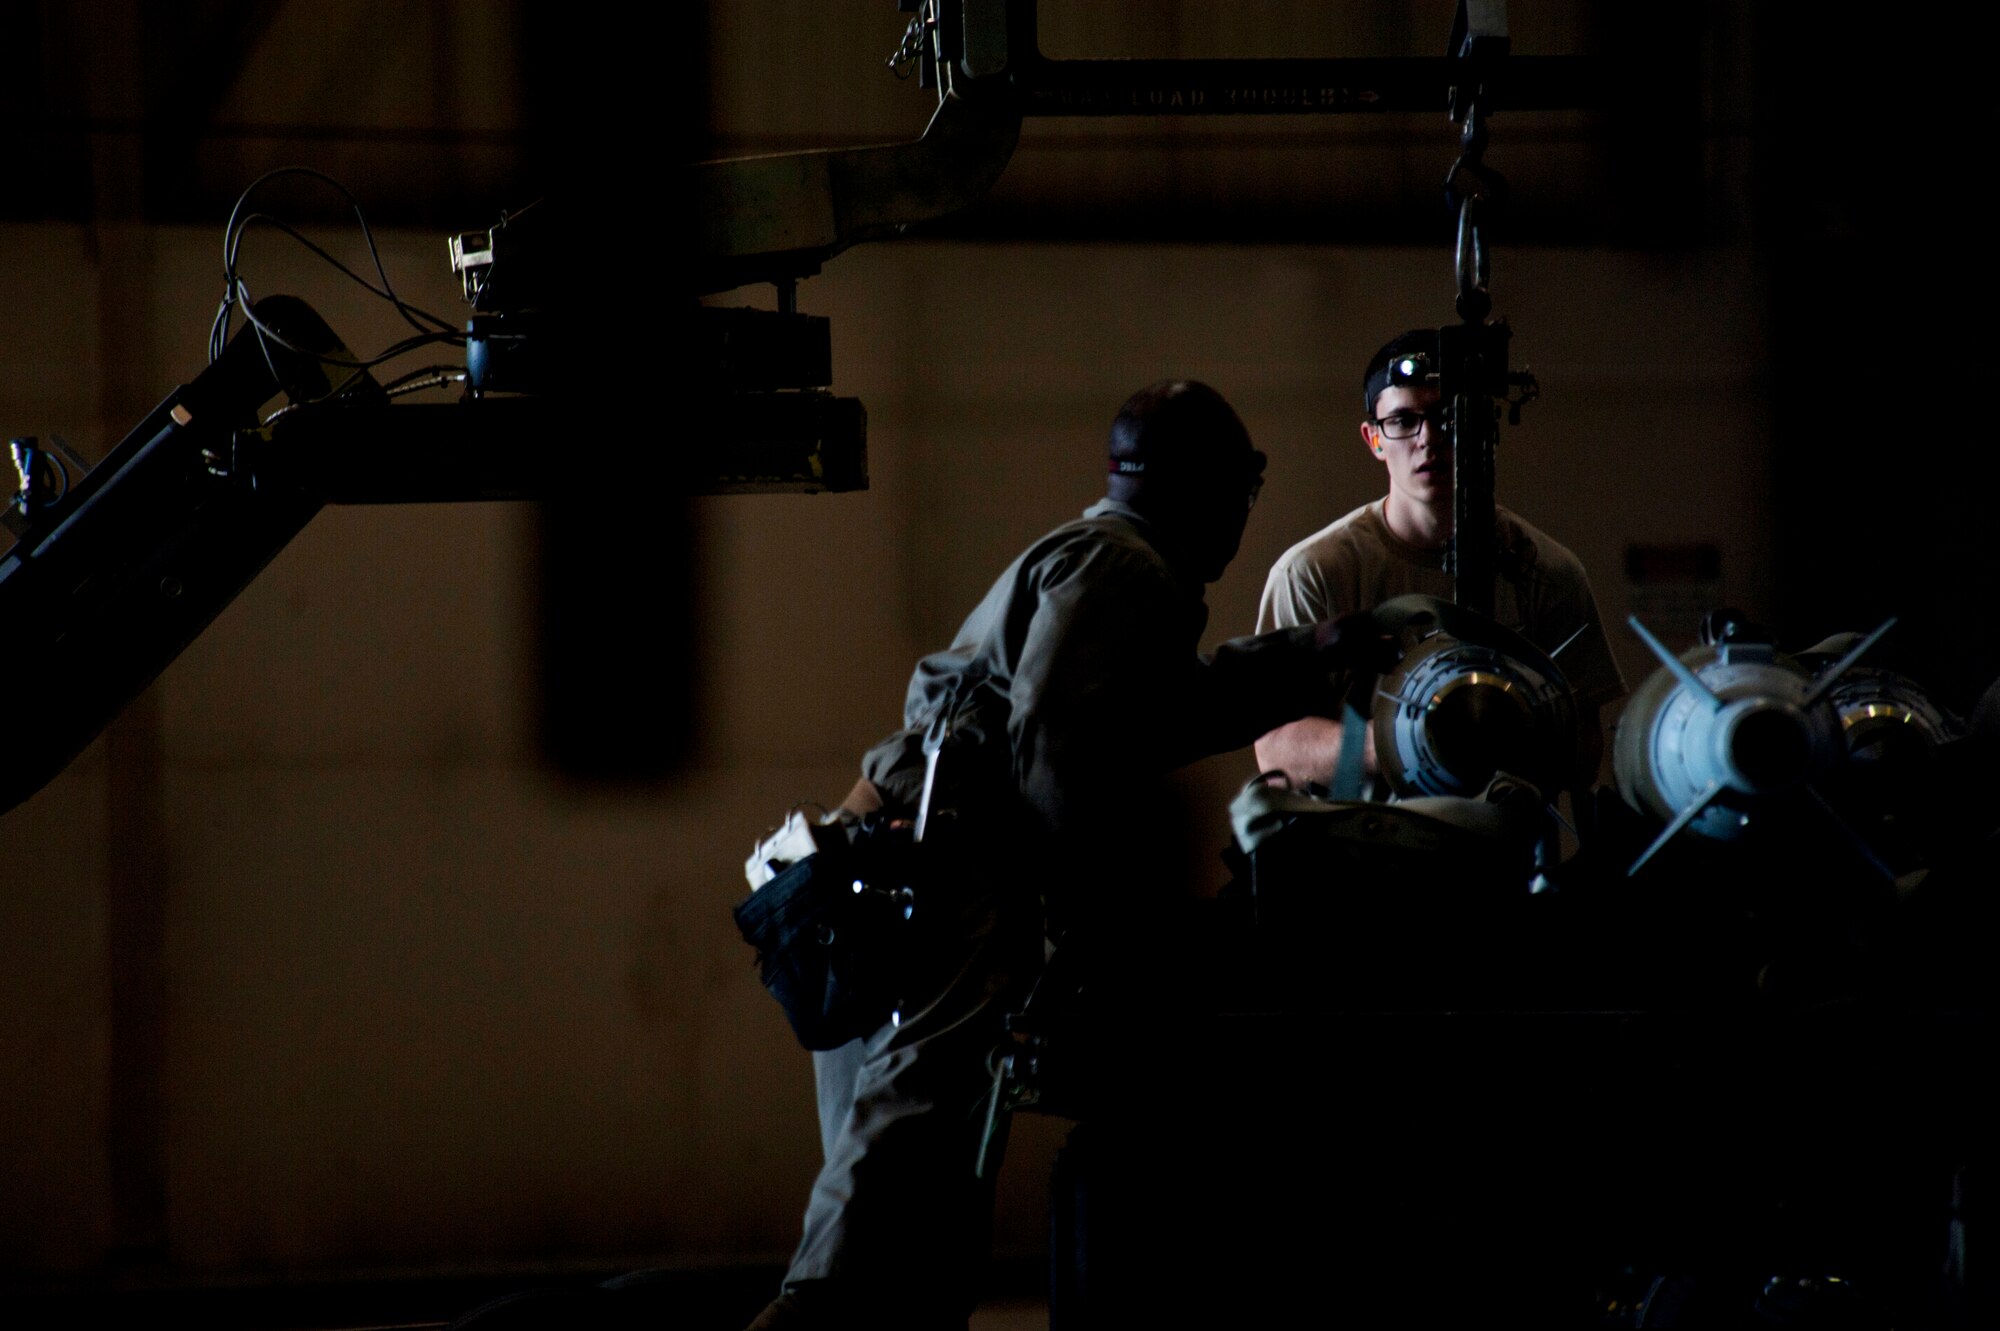 Staff Sgt. Kelvin McCrea and Senior Airman Andrew Grimes, 5th Aircraft Maintenance Squadron weapons load crew members, load a joint direct attack GBU-38 munition from a trailer onto a MJ-1 Jammer on Minot Air Force Base, N.D., Sept. 5, 2014. The load crew is evaluated on how quickly they load munitions on a B-52H Stratofortress and how many discrepancies are found. (U.S. Air Force photo/Senior Airman Brittany Y. Bateman)